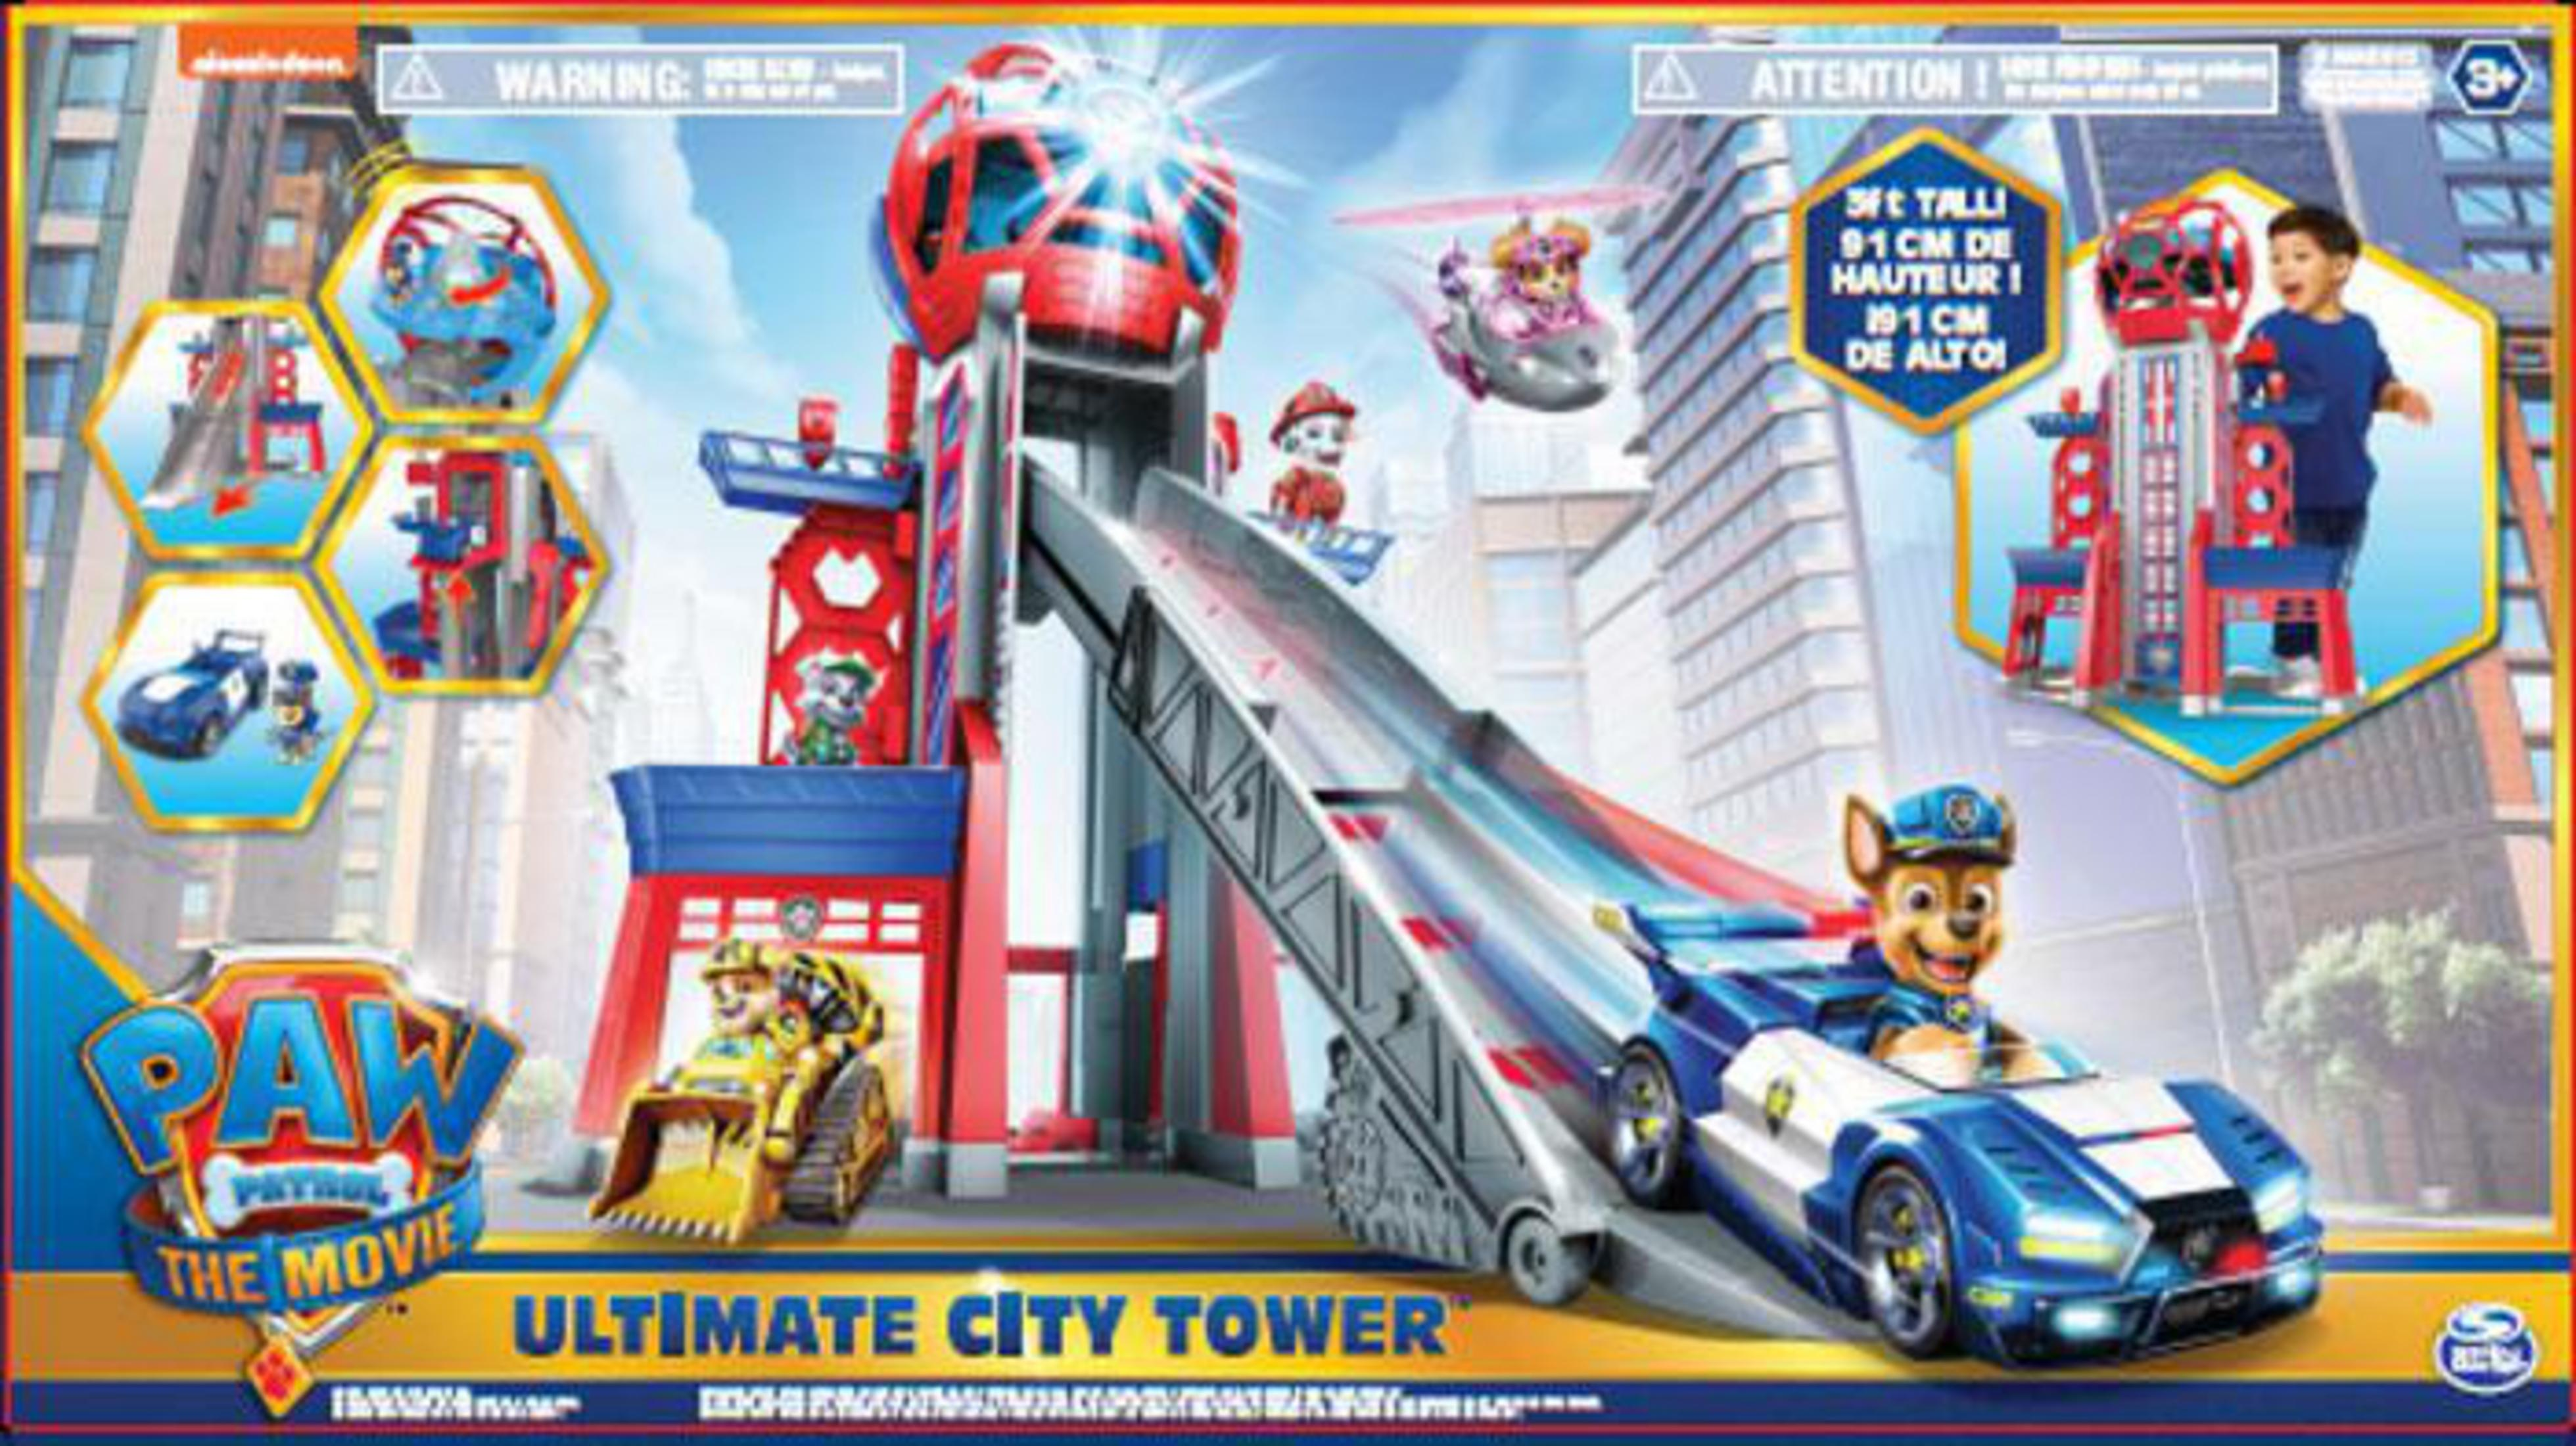 CITY ADVENTURE MOVIE MASTER LIFESIZE SPIN PAW Mehrfarbig Spielset 36352 TOWER